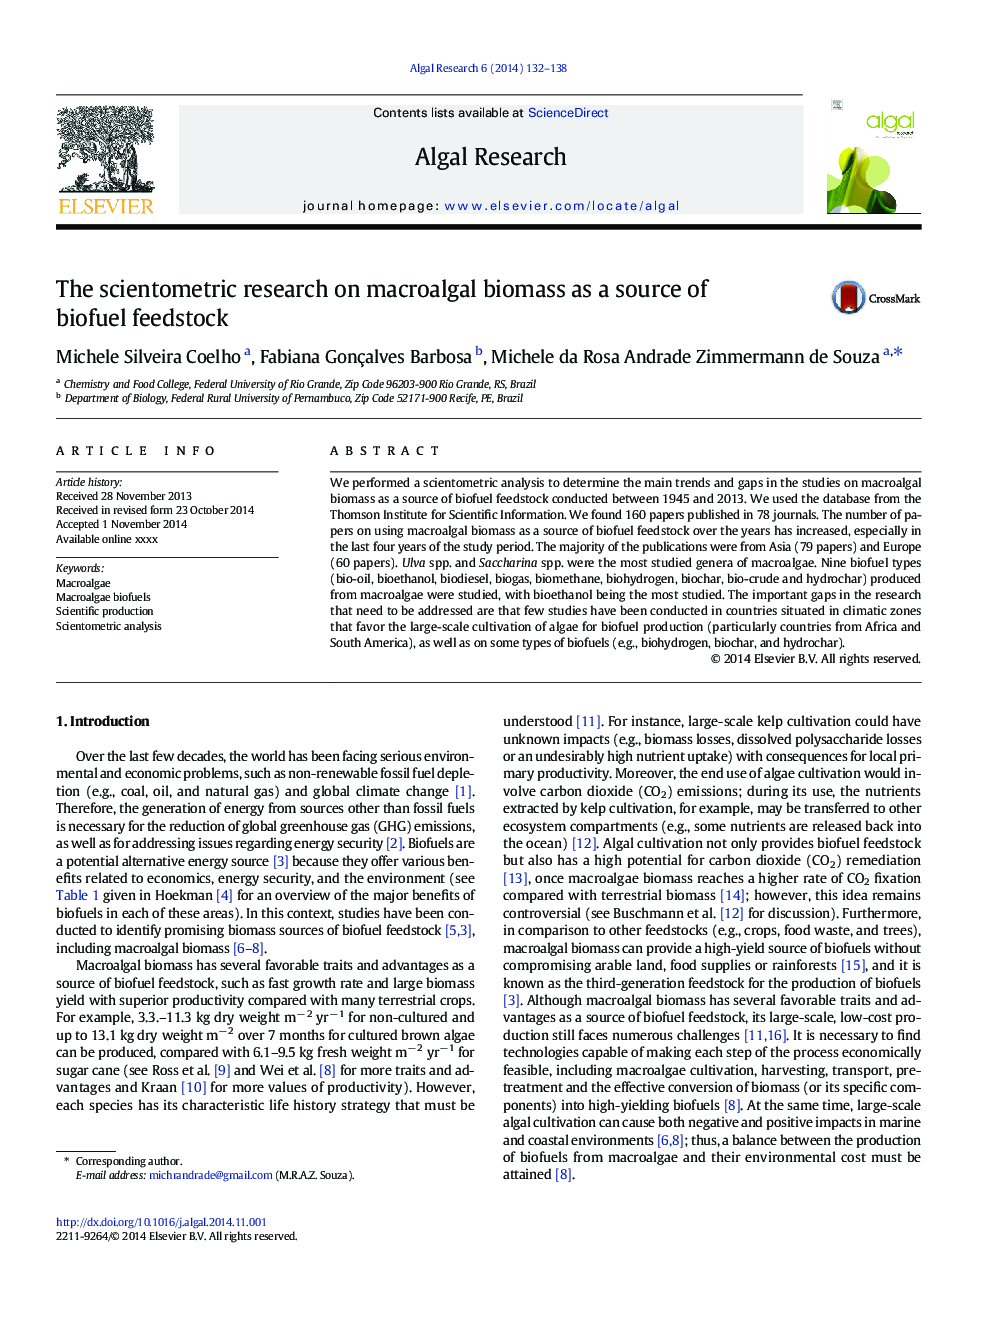 The scientometric research on macroalgal biomass as a source of biofuel feedstock